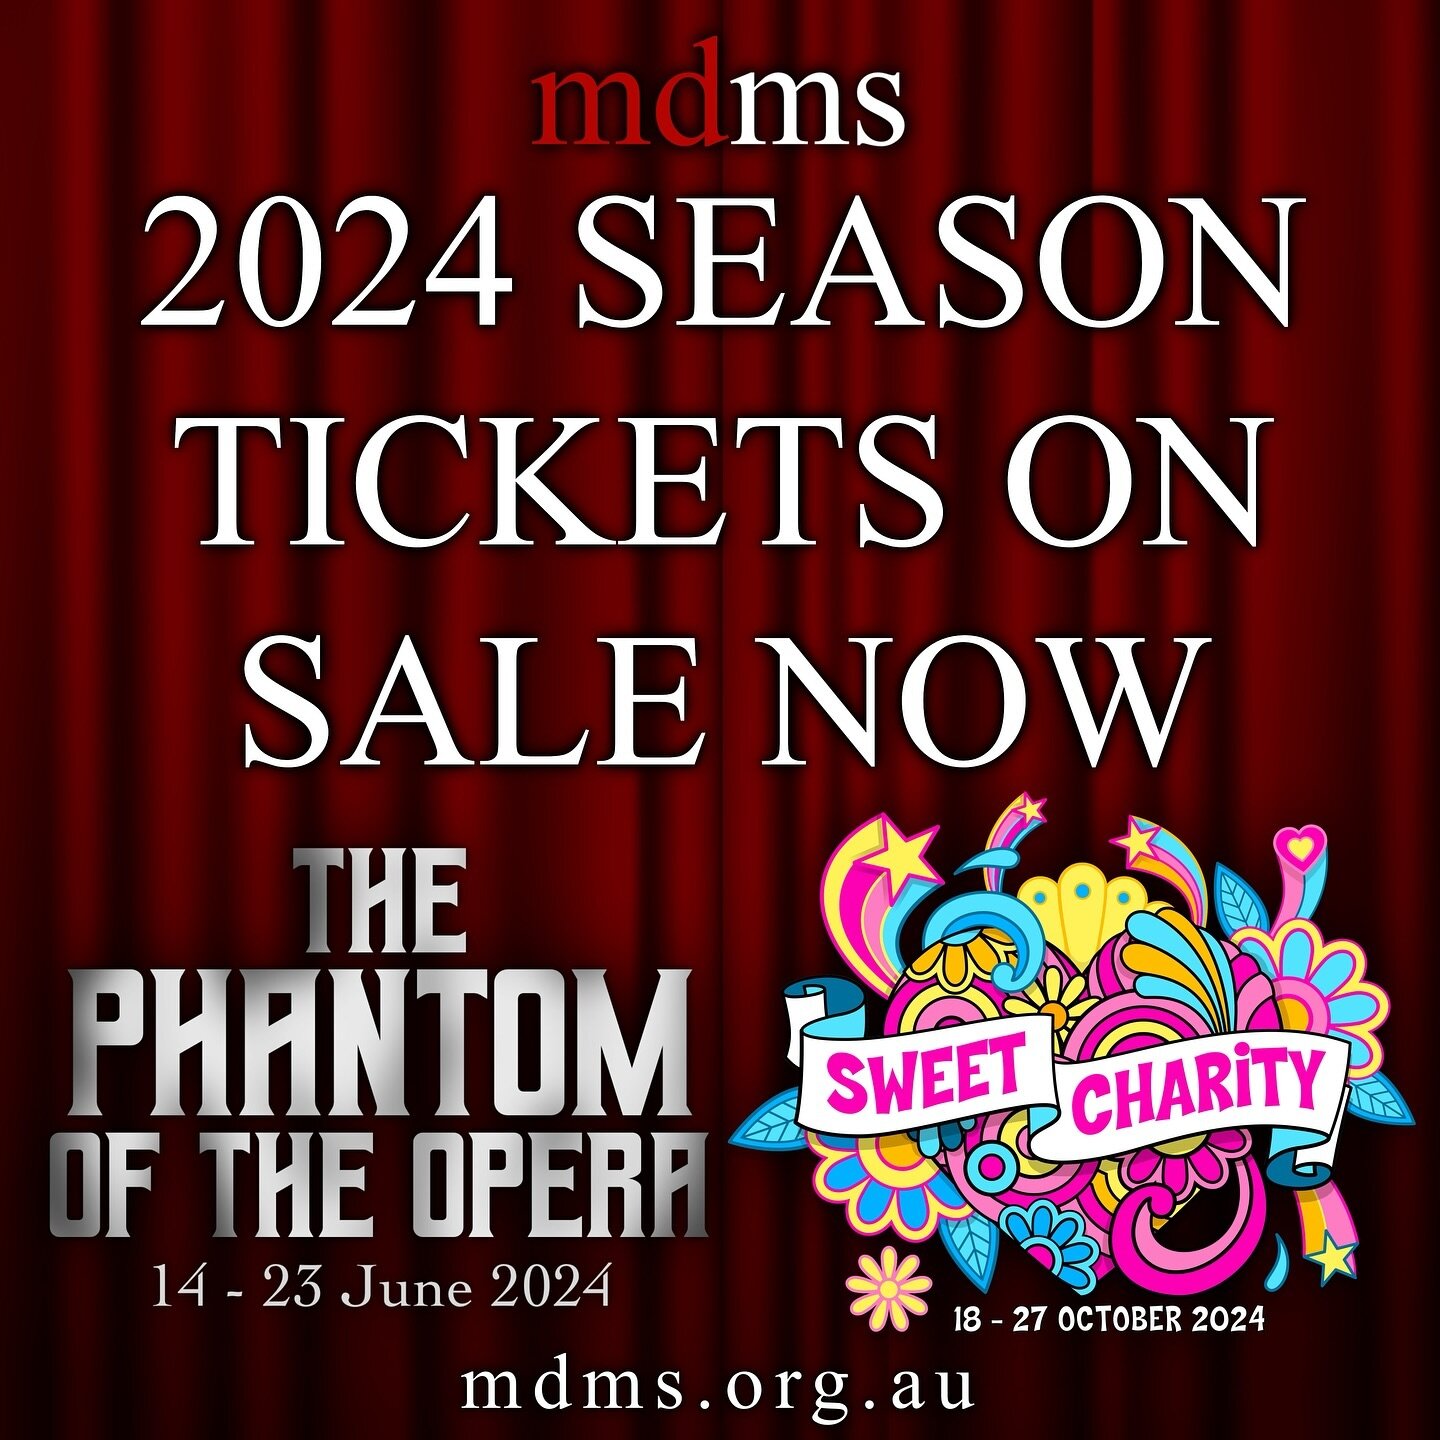 MDMS is thrilled to open ticket bookings for our 2024 season at @karralyka 🤩
♫ 𝙏𝙃𝙀 𝙋𝙃𝘼𝙉𝙏𝙊𝙈 𝙊𝙁 𝙏𝙃𝙀 𝙊𝙋𝙀𝙍𝘼 &bull; June 14-23
✿ 𝙎𝙒𝙀𝙀𝙏 𝘾𝙃𝘼𝙍𝙄𝙏𝙔 &bull; October 18-27
Visit 𝙢𝙙𝙢𝙨.𝙤𝙧𝙜.𝙖𝙪 to book tickets now!
#mdms